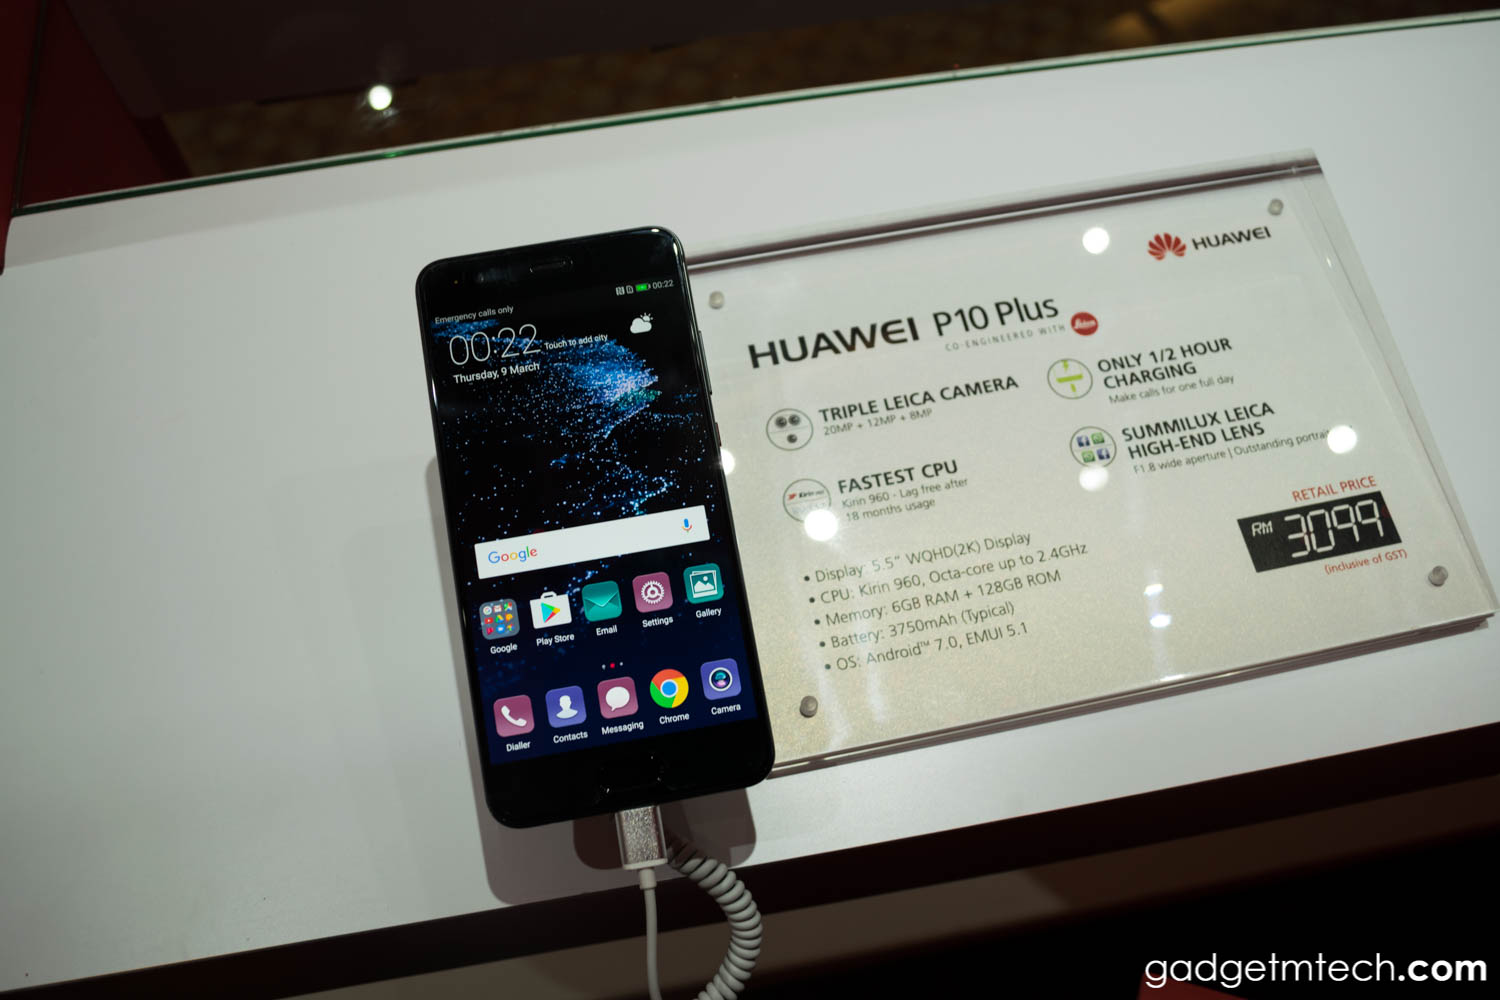 Huawei P10 Plus Will Be Available in Malaysia on April 8 at All Huawei Experience Stores